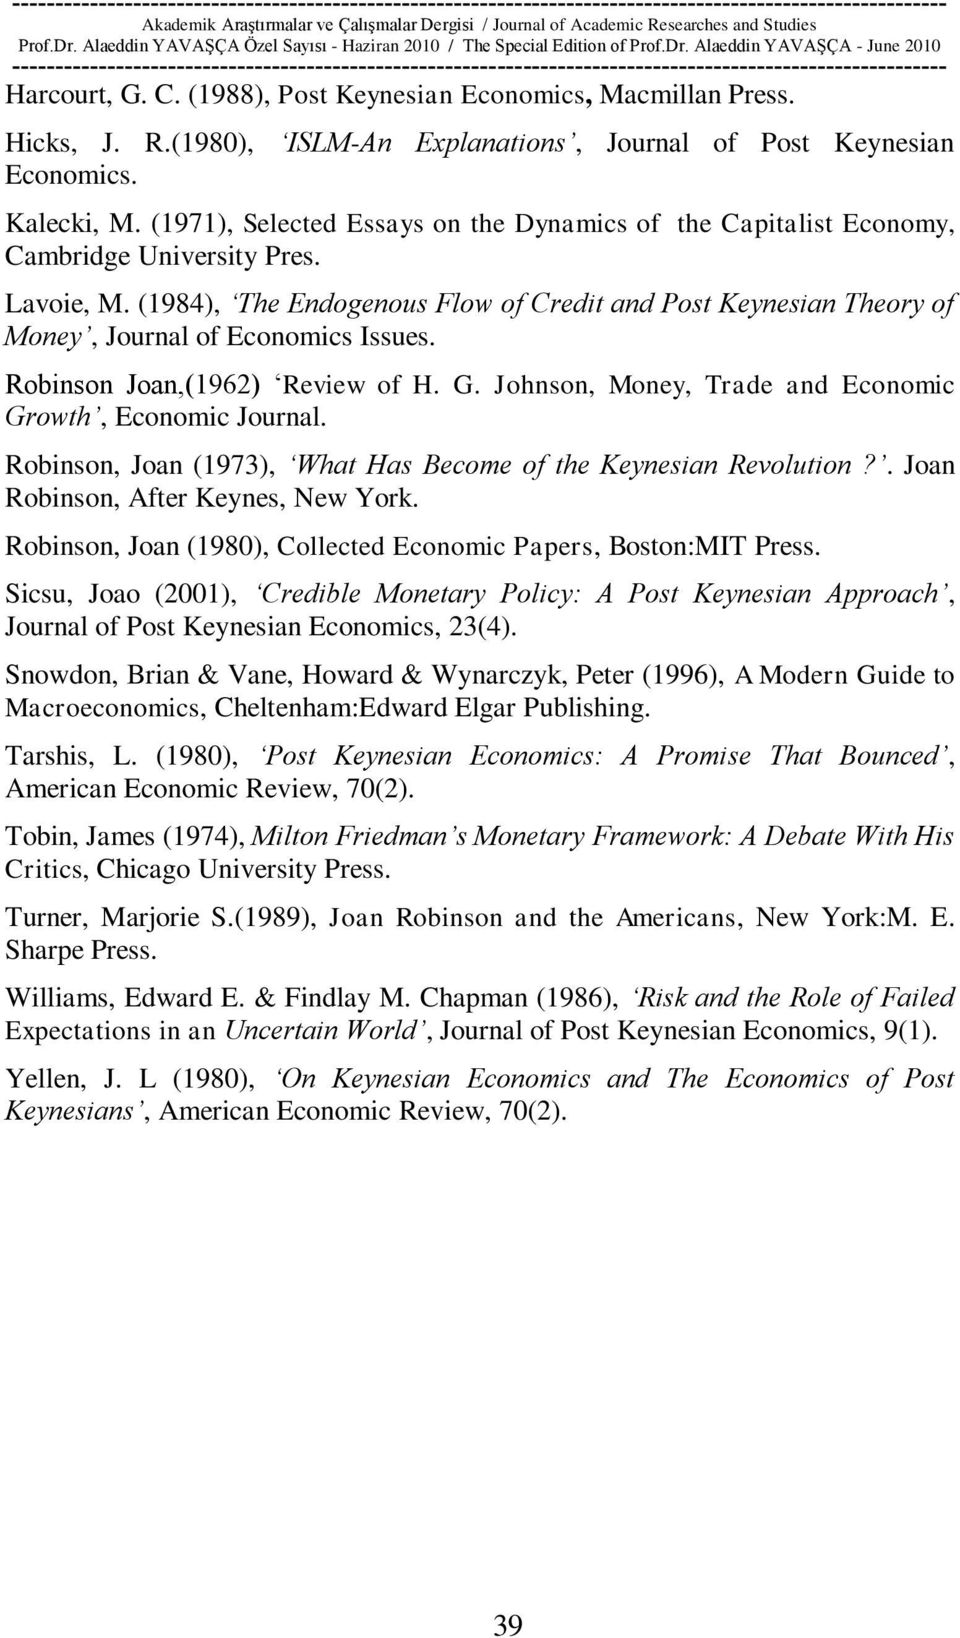 (1984), The Endogenous Flow of Credit and Post Keynesian Theory of Money, Journal of Economics Issues. Robinson Joan,(1962) Review of H. G. Johnson, Money, Trade and Economic Growth, Economic Journal.